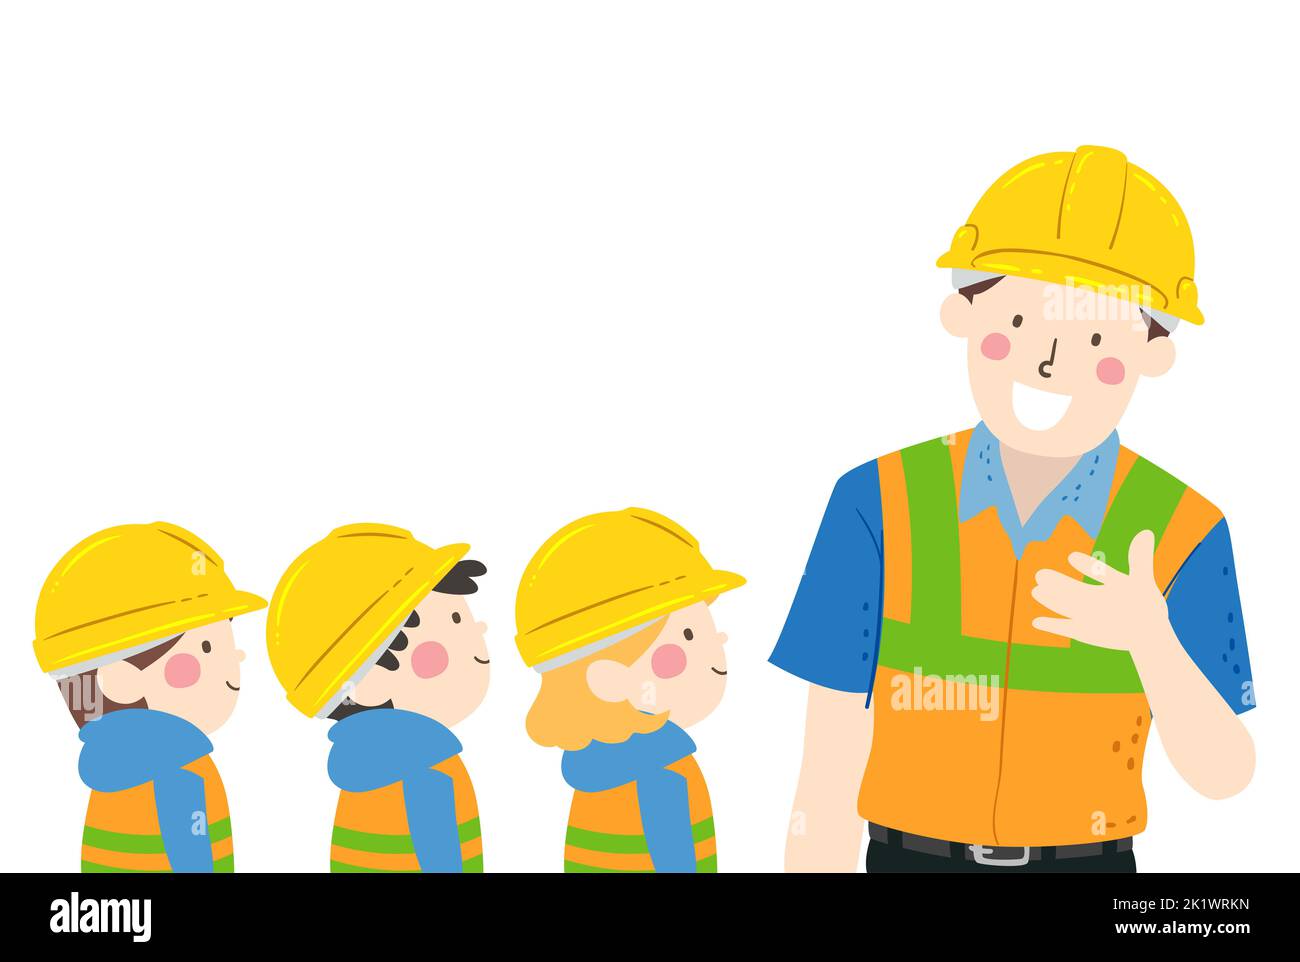 Illustration of Kids Wearing Yellow Hard Hat and Reflective Vest Listening to an Engineer Talking Stock Photo